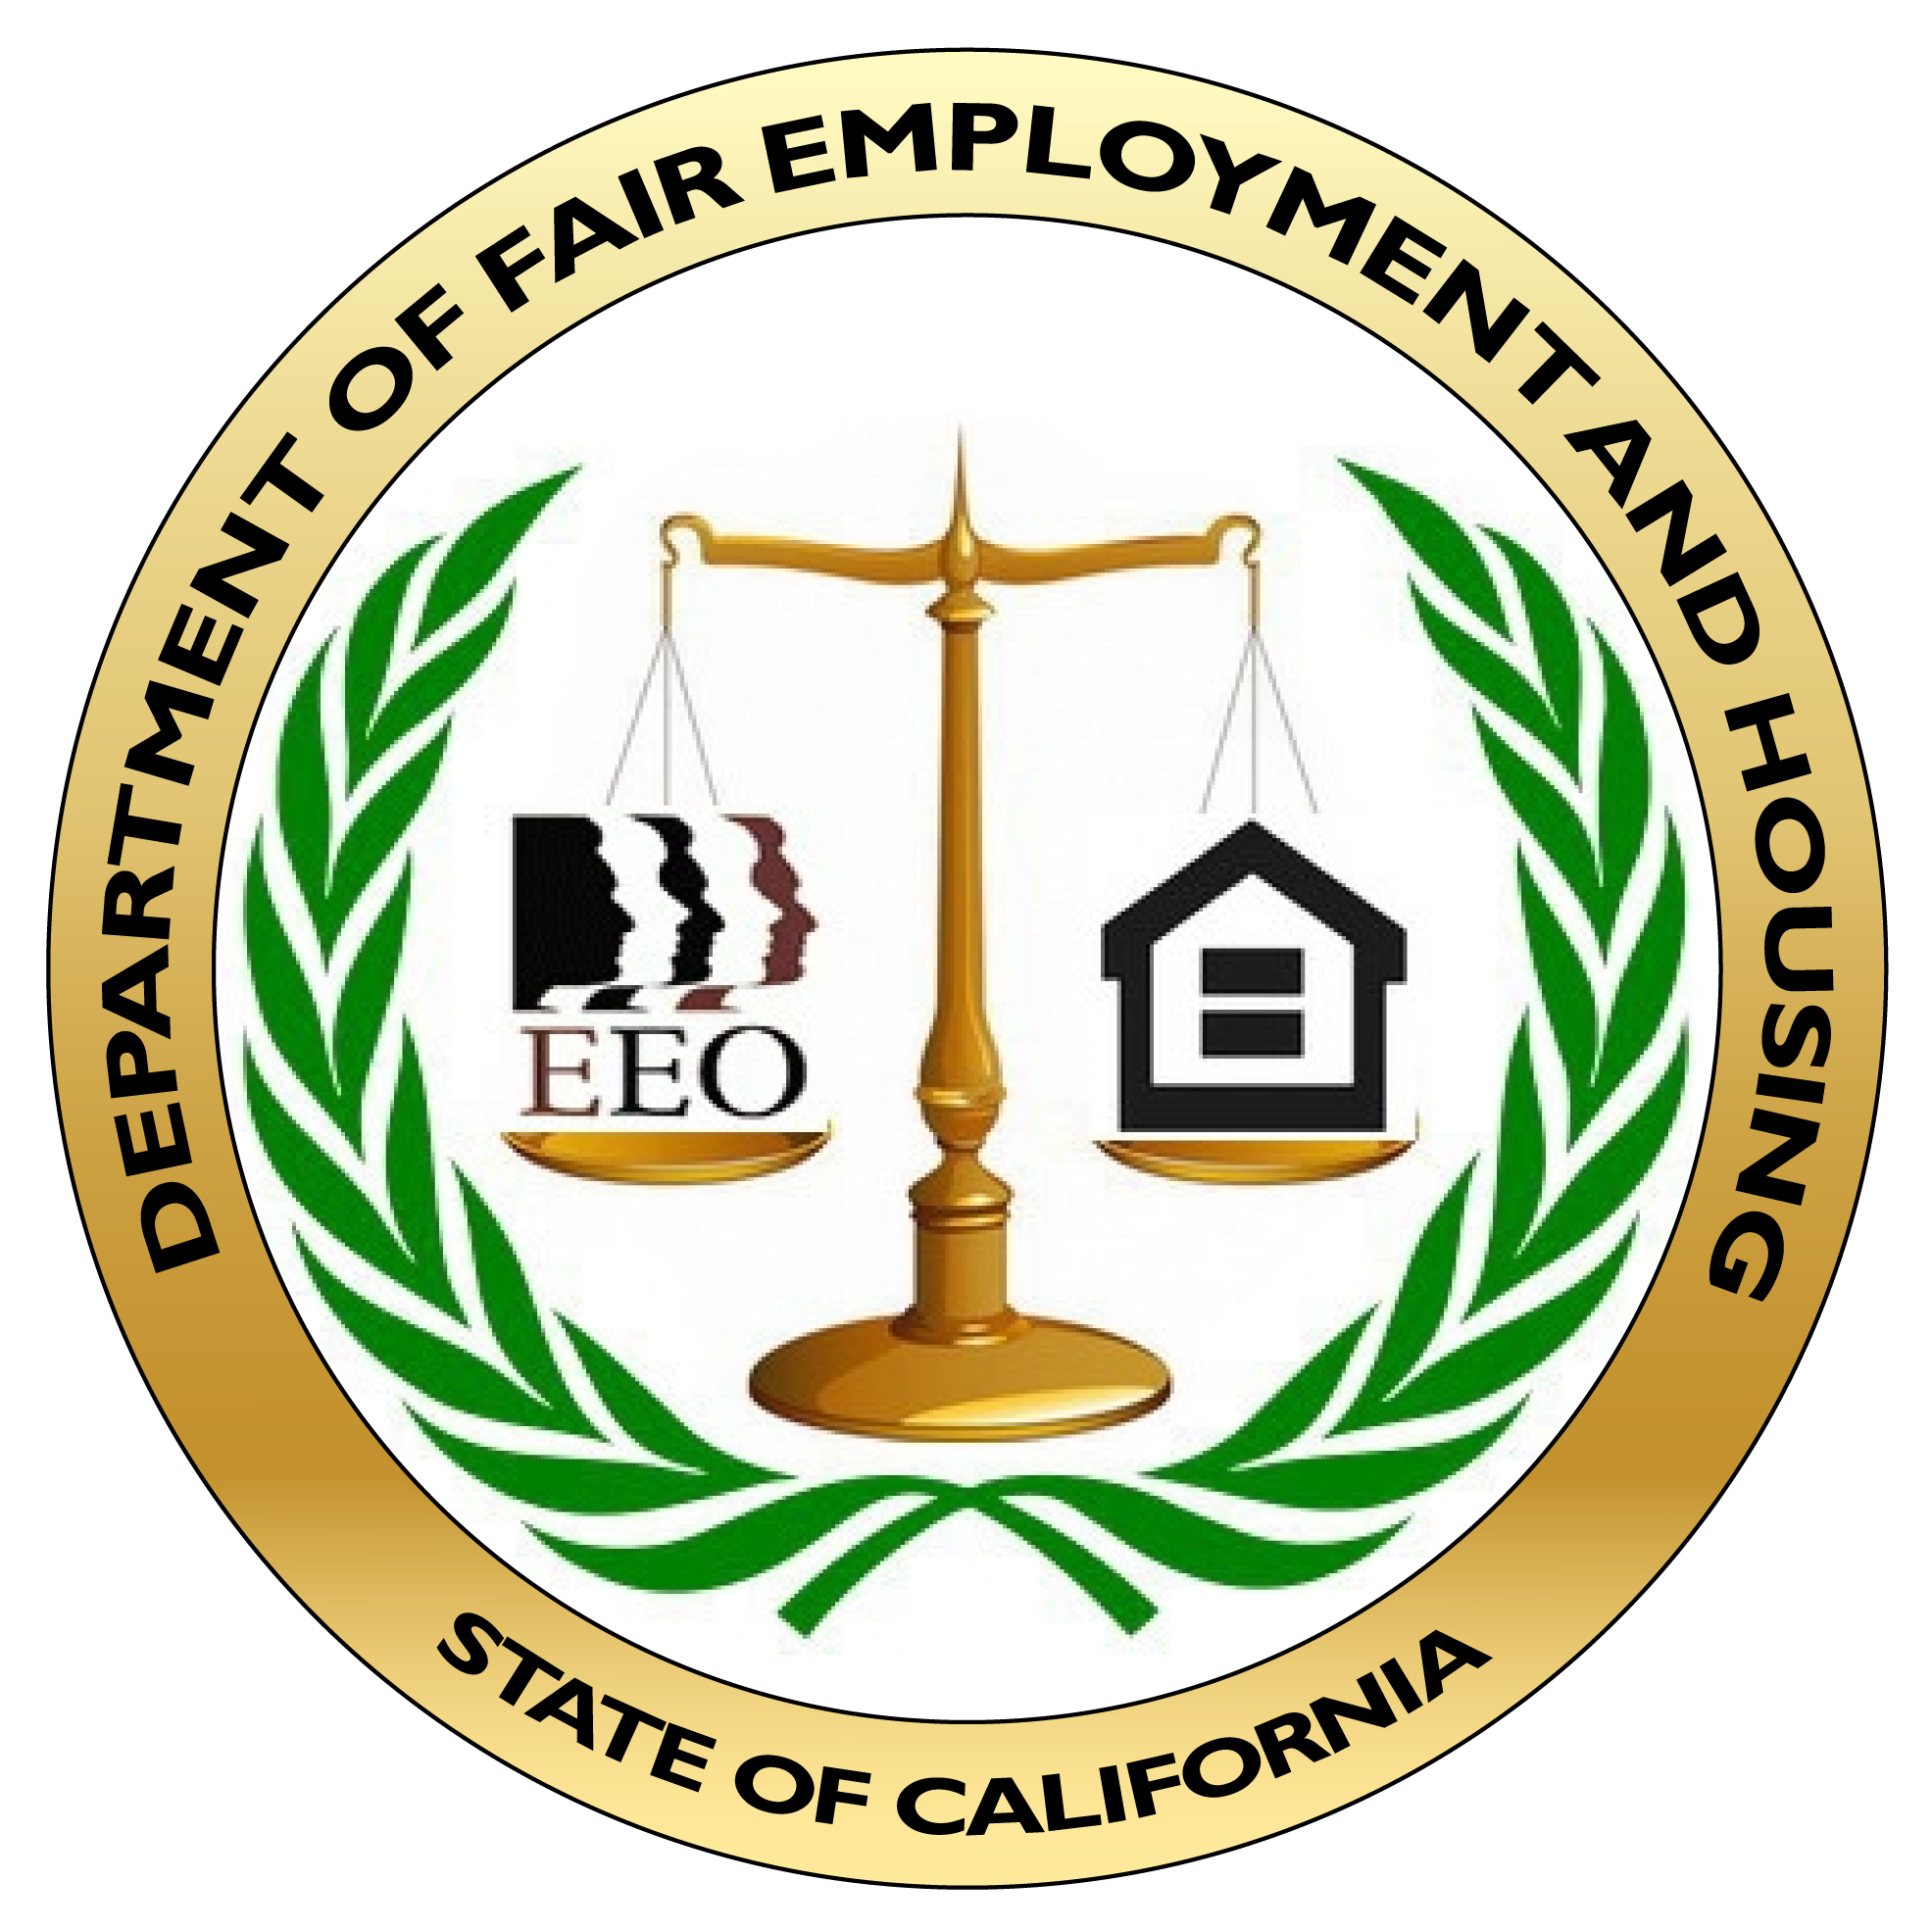 Official seal for the State of California's Department of Fair Employment and Housing